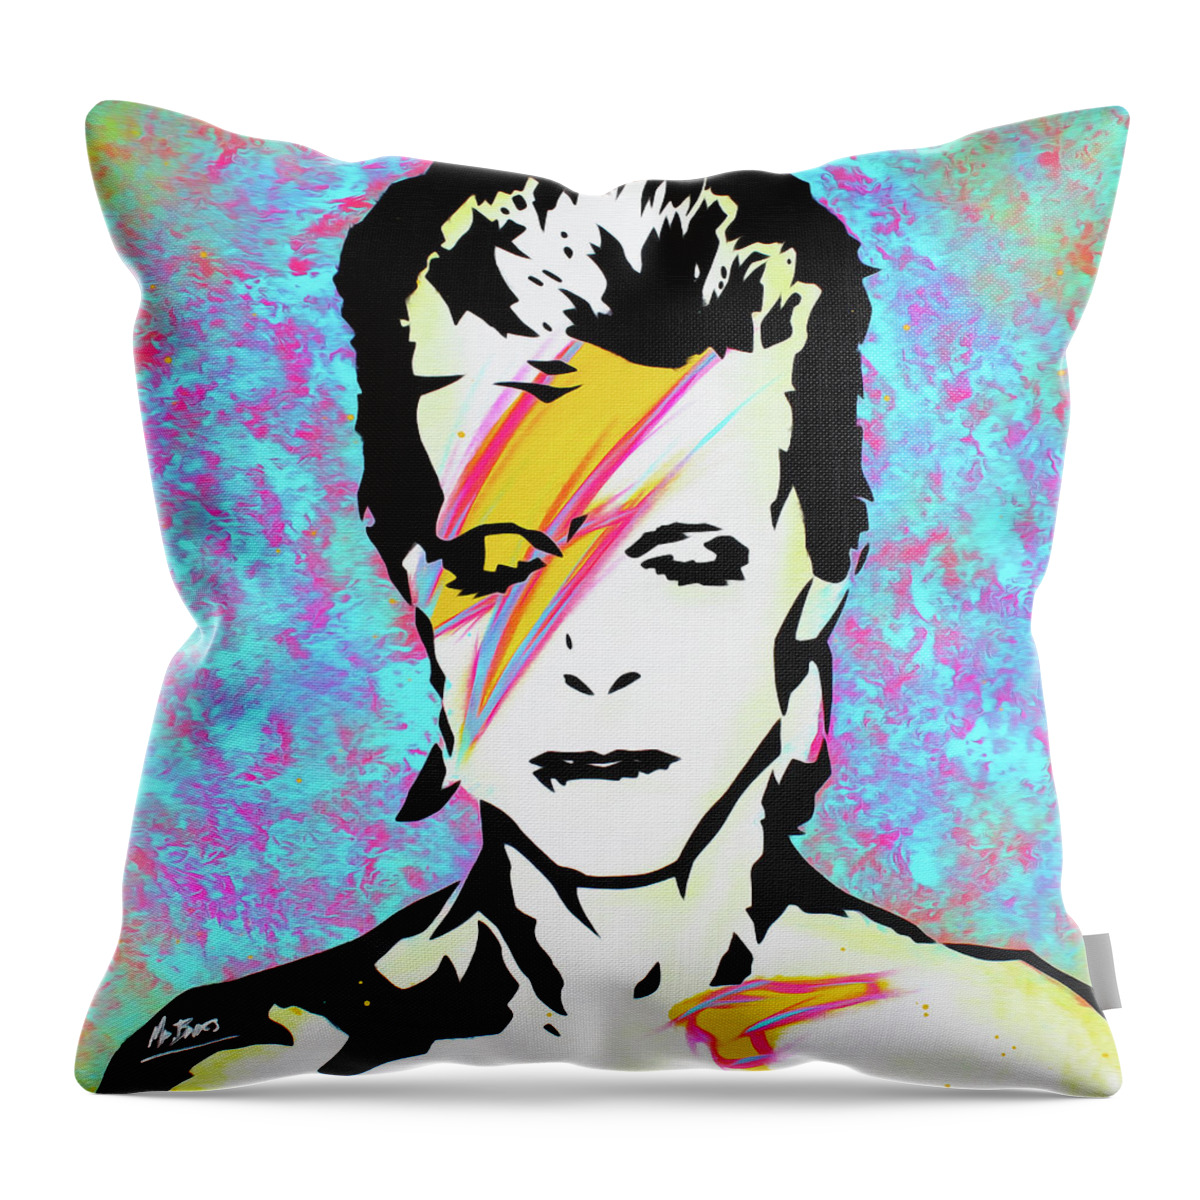 Mr Babes Throw Pillow featuring the painting David Bowie - Aladdin Sane by Mr Babes